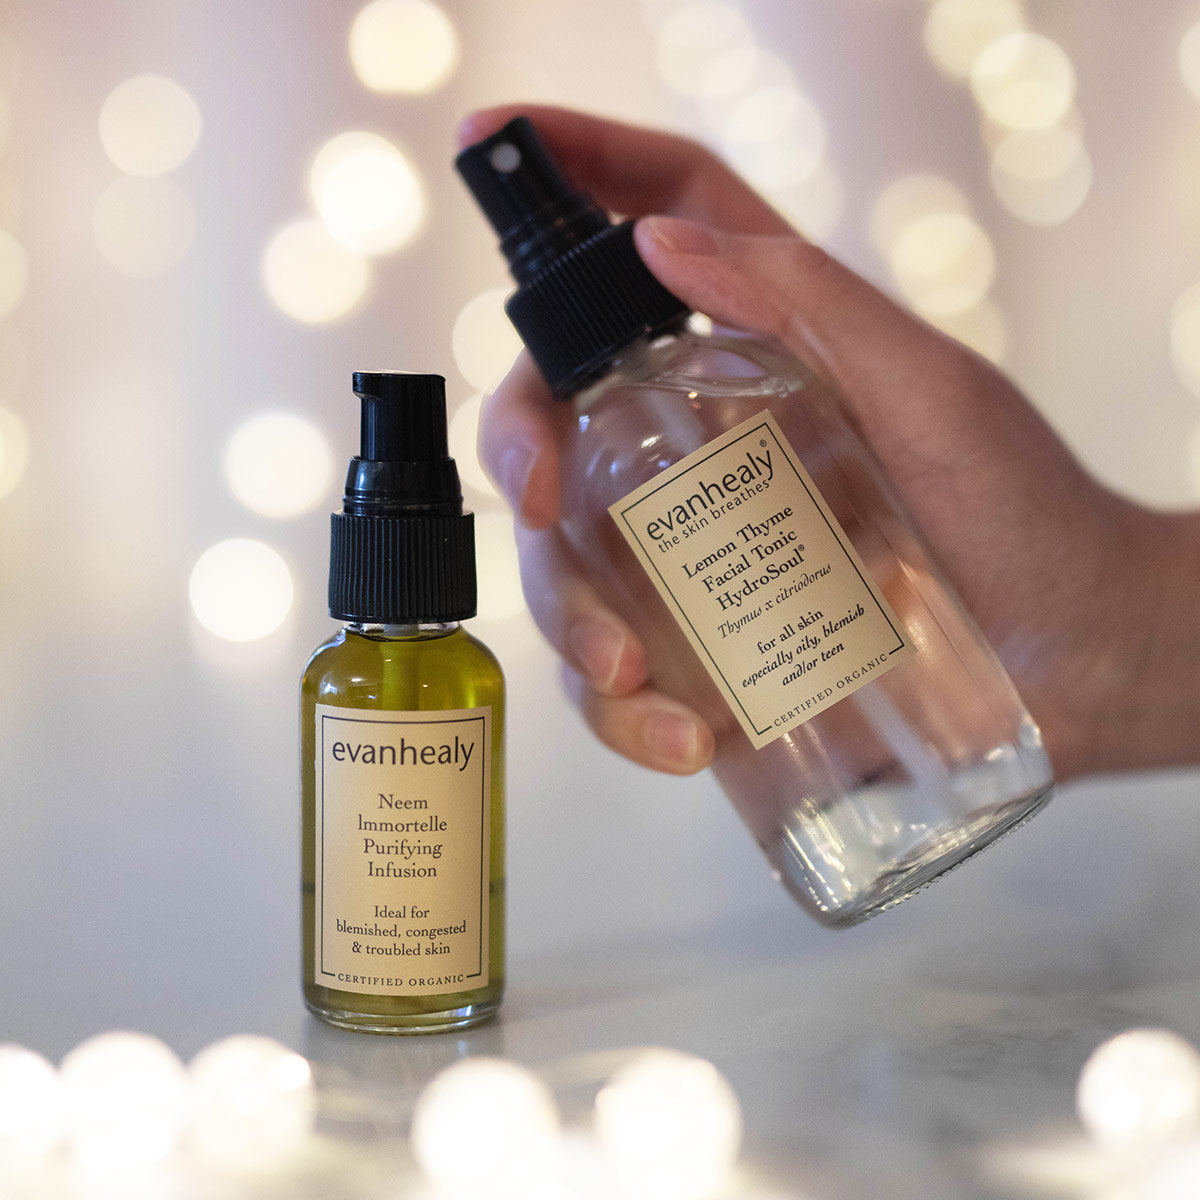 neem immortelle purifying infusion on surface with lemon thyme hydrosol in hand